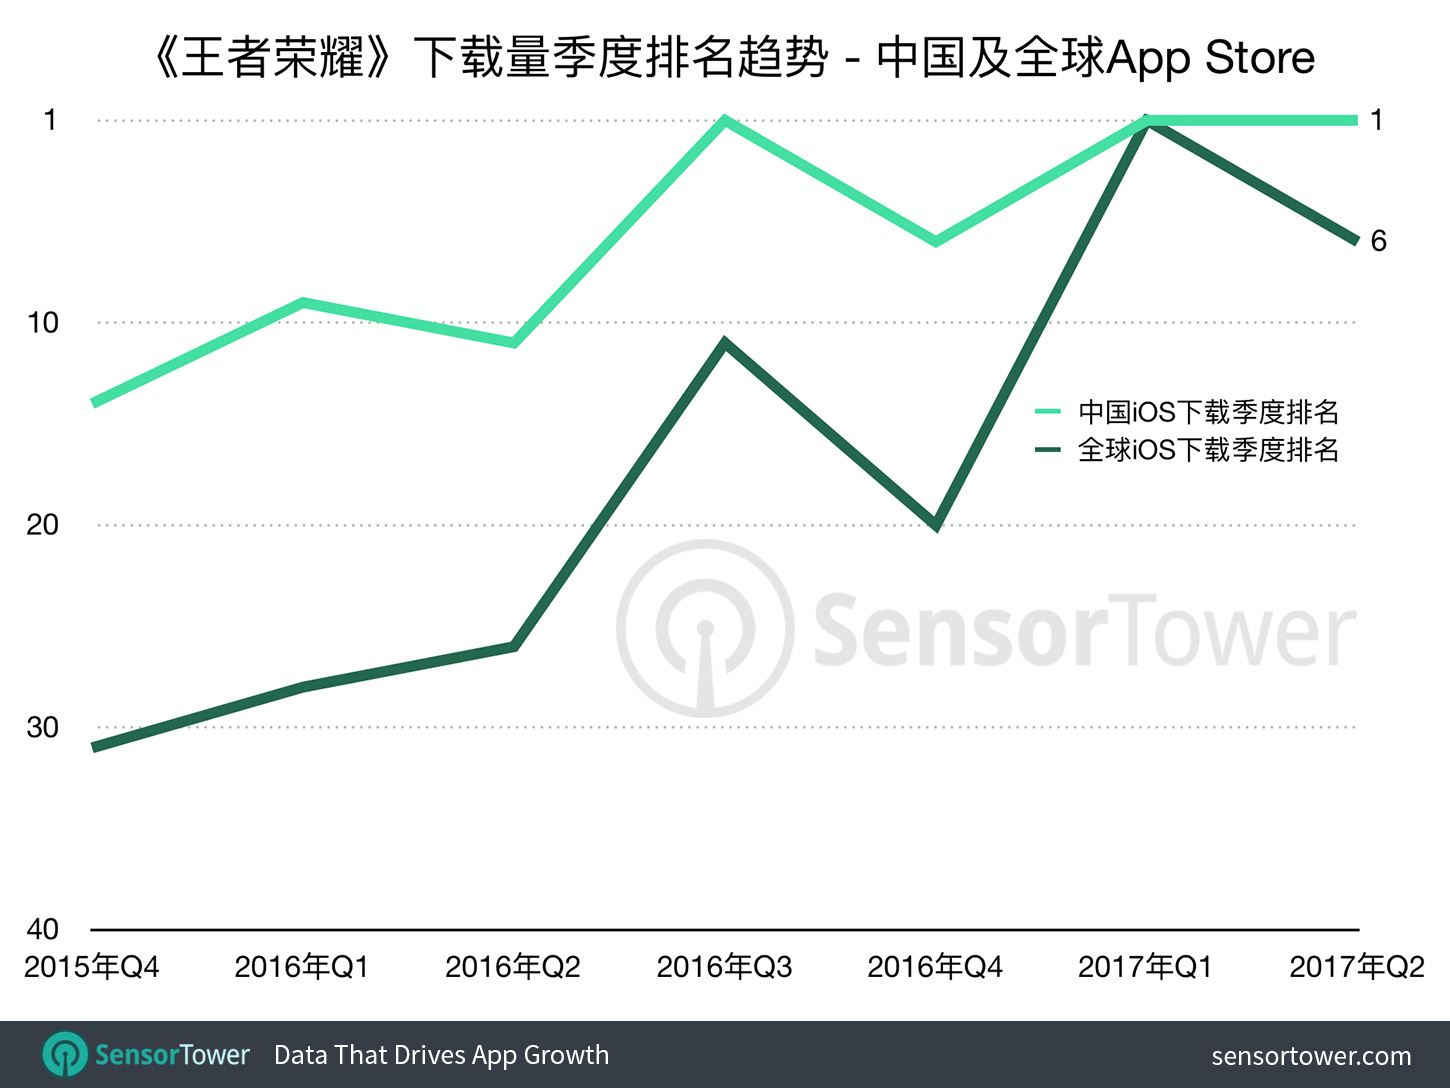 Quarterly revenue for Tencent's Honor of Kings